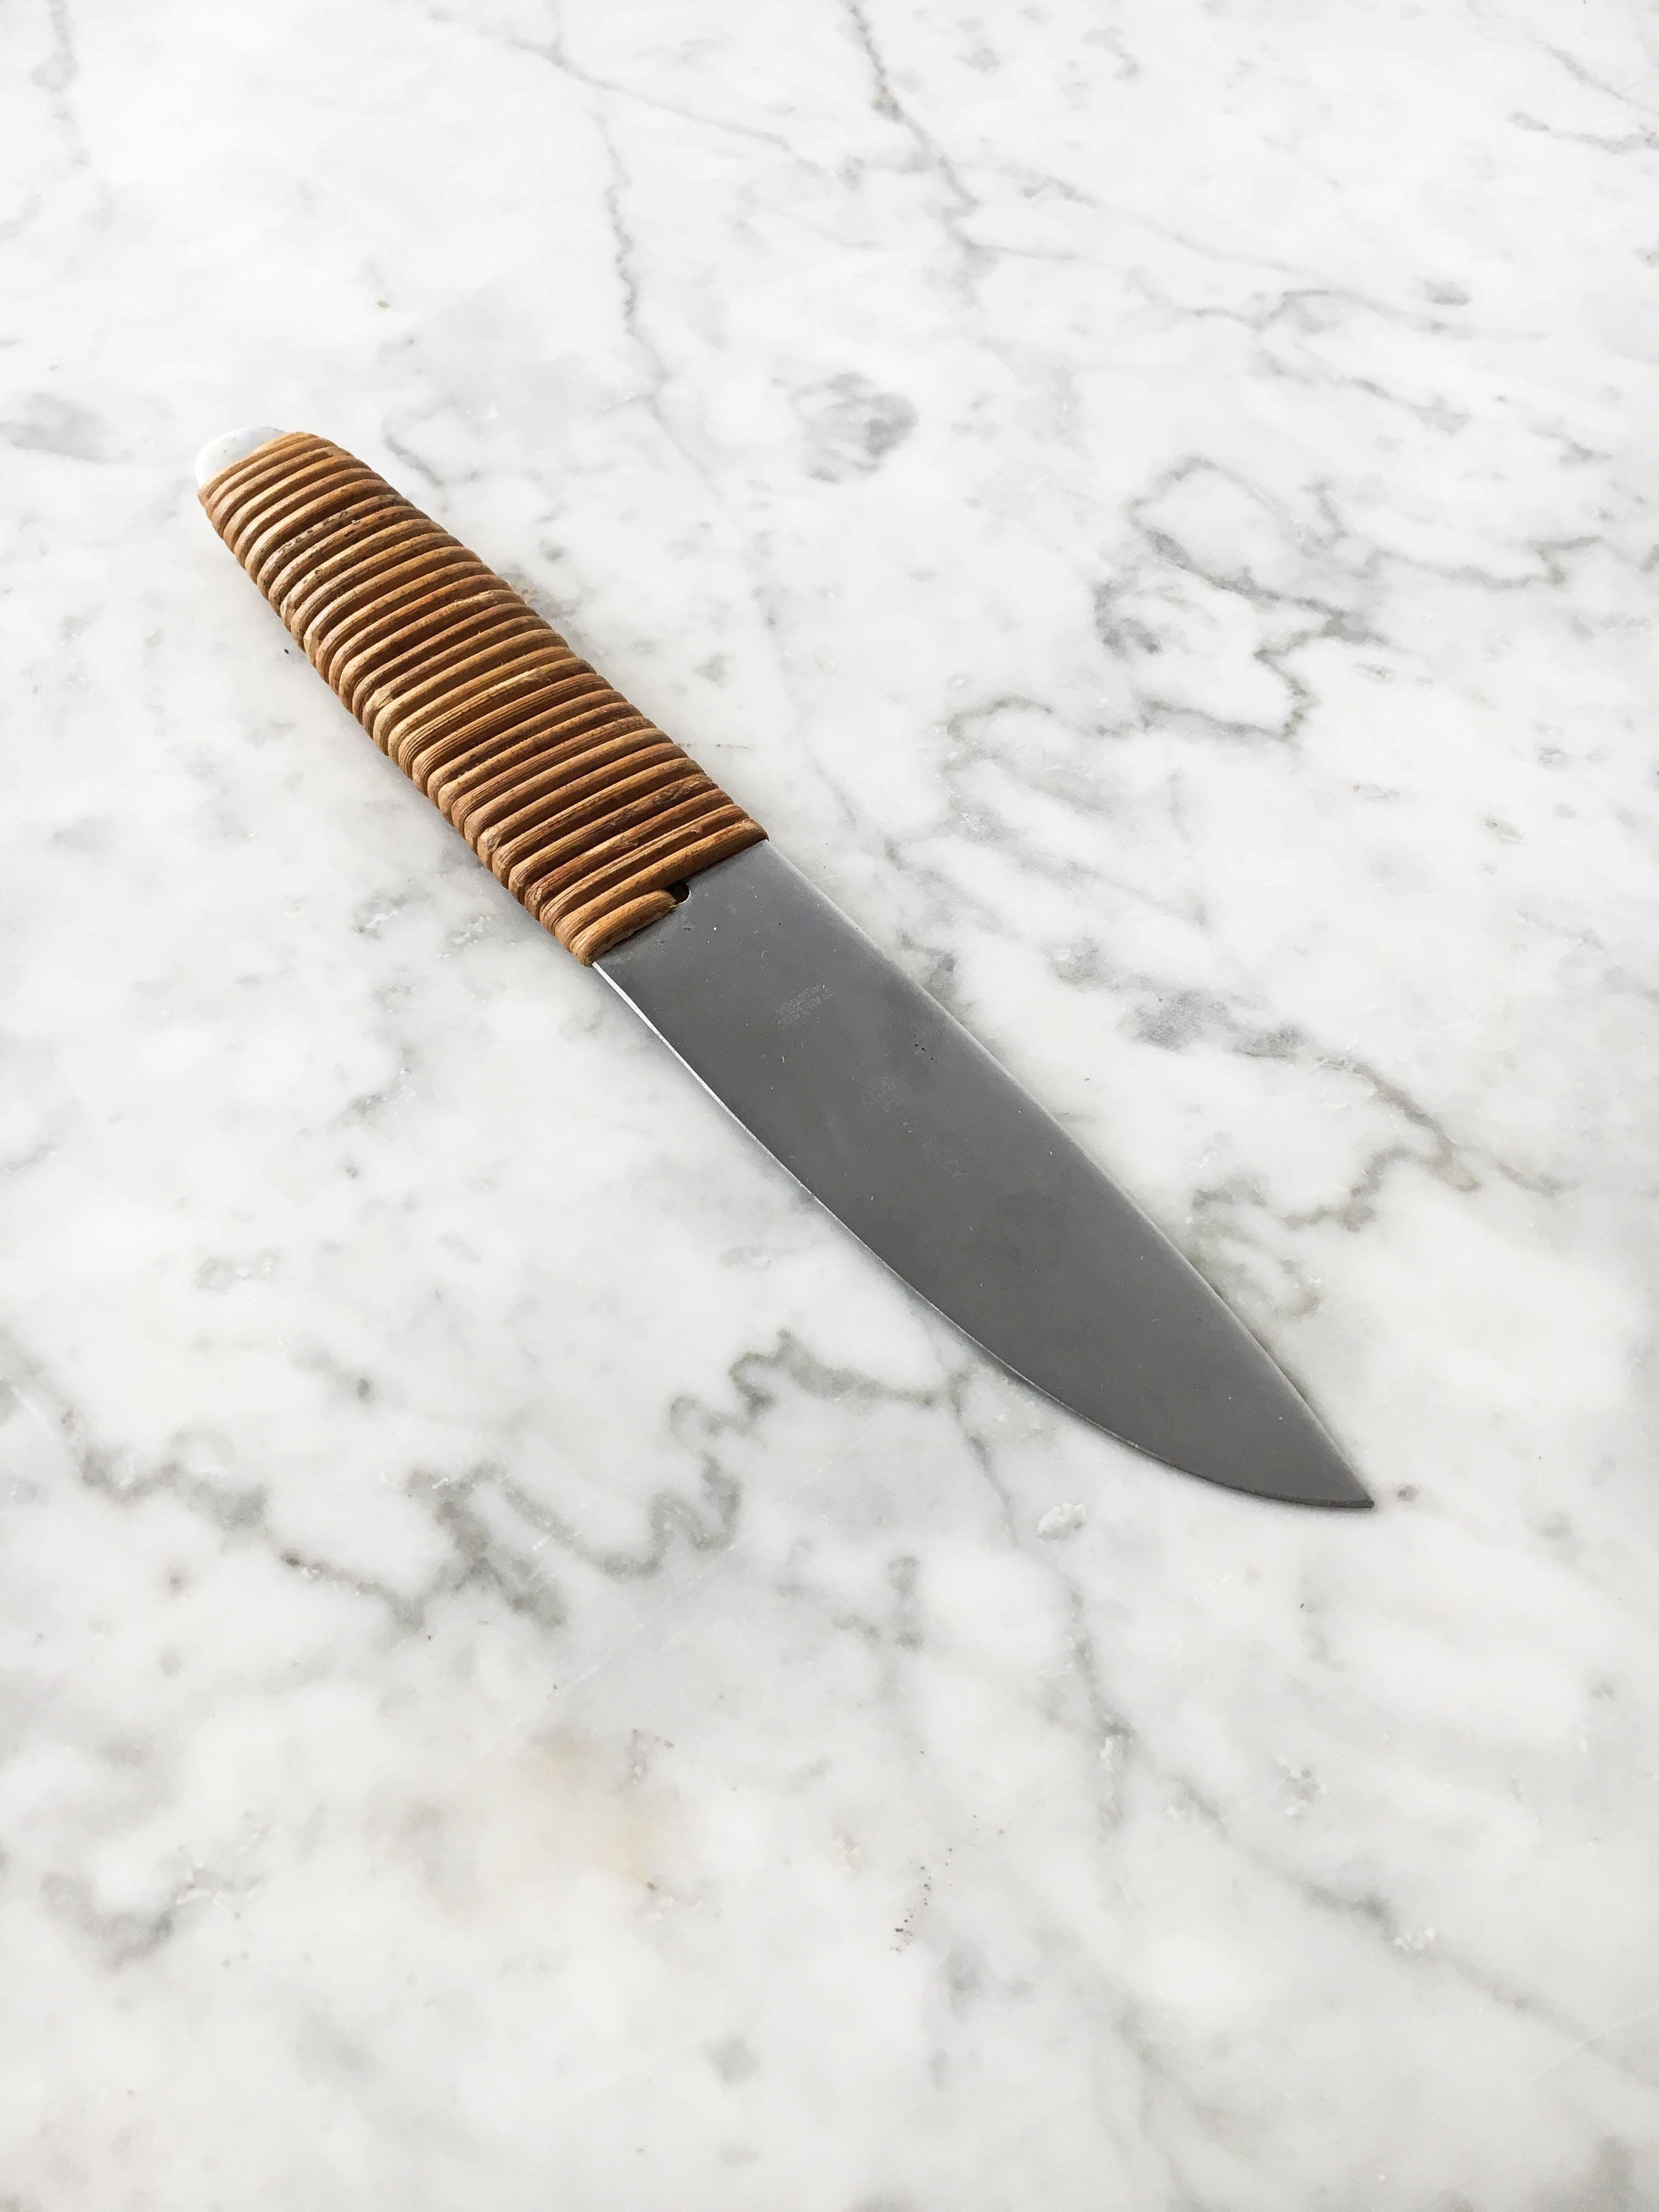 Carl Auböck II Letter Opener Knife Cane Wrapped Model '4828', Austria 1950s.  Beautifully sculpted steel letter opener in the shape of a knife with fine rattan weaving with lovely patina. Signed: AUBÖCK AUSTRIA